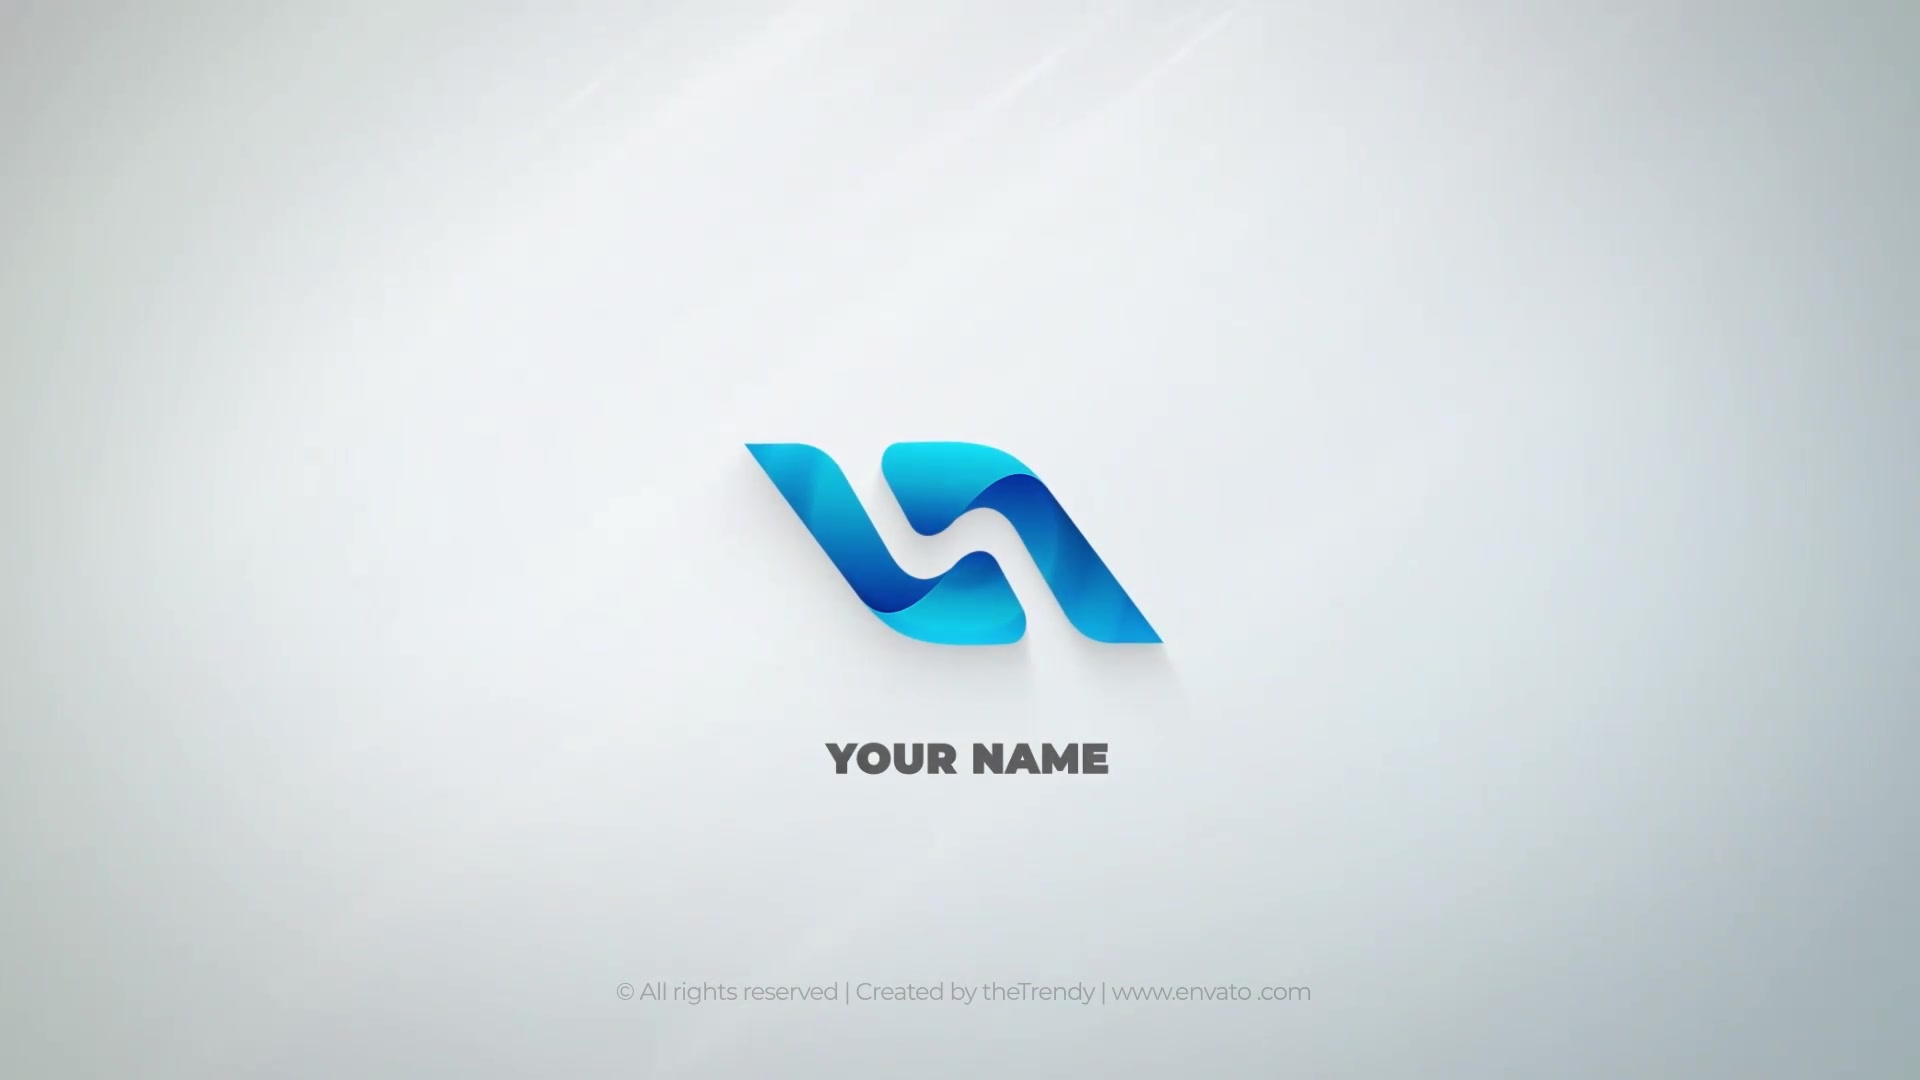 How to Make  Channel Minimal Logo Reveal Animation intro in